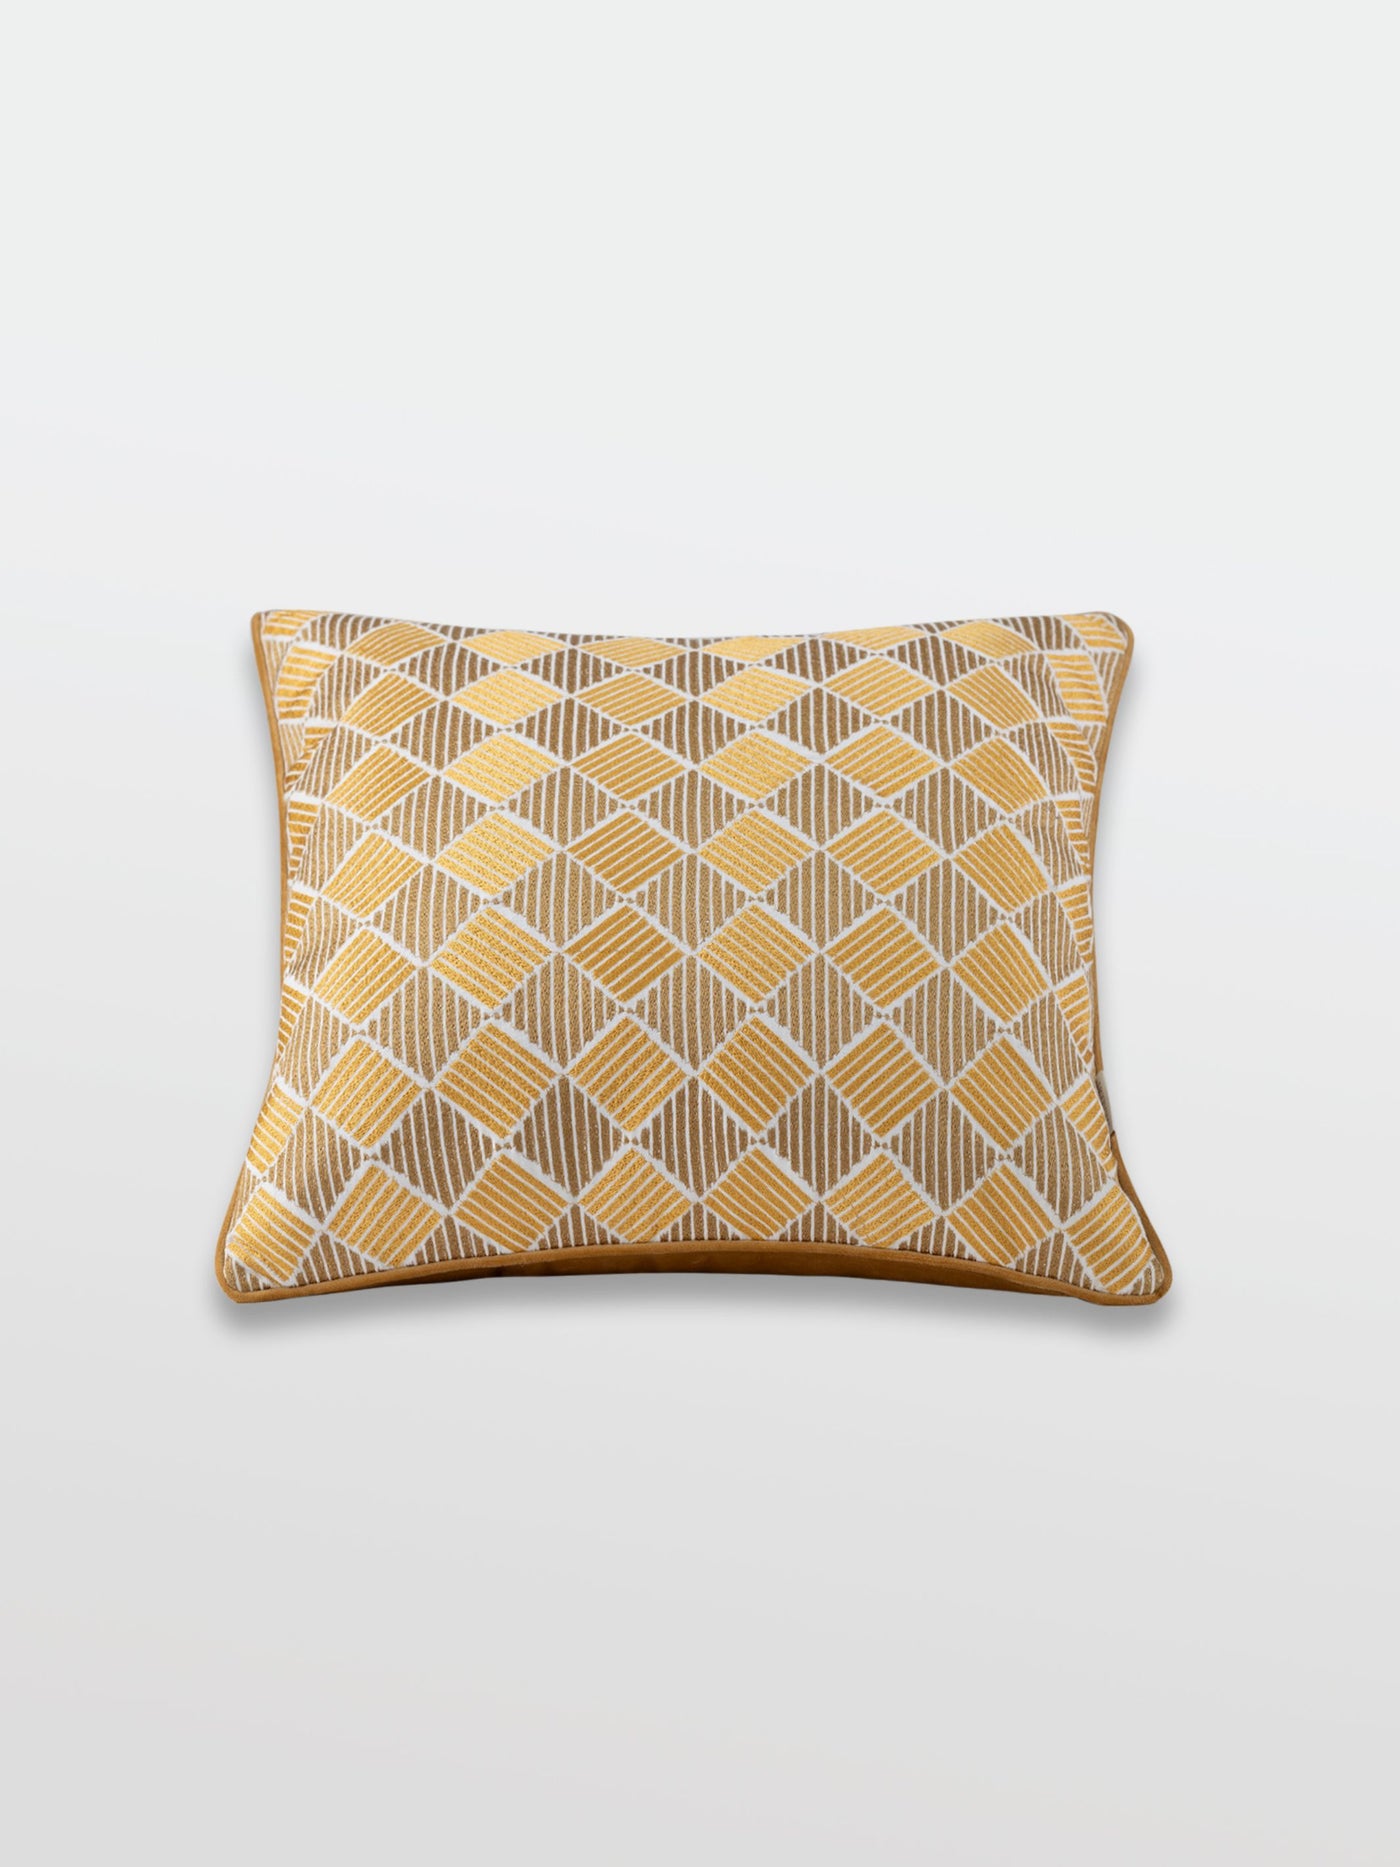 Cushion Cover - Kaudi Bagh Embroidered